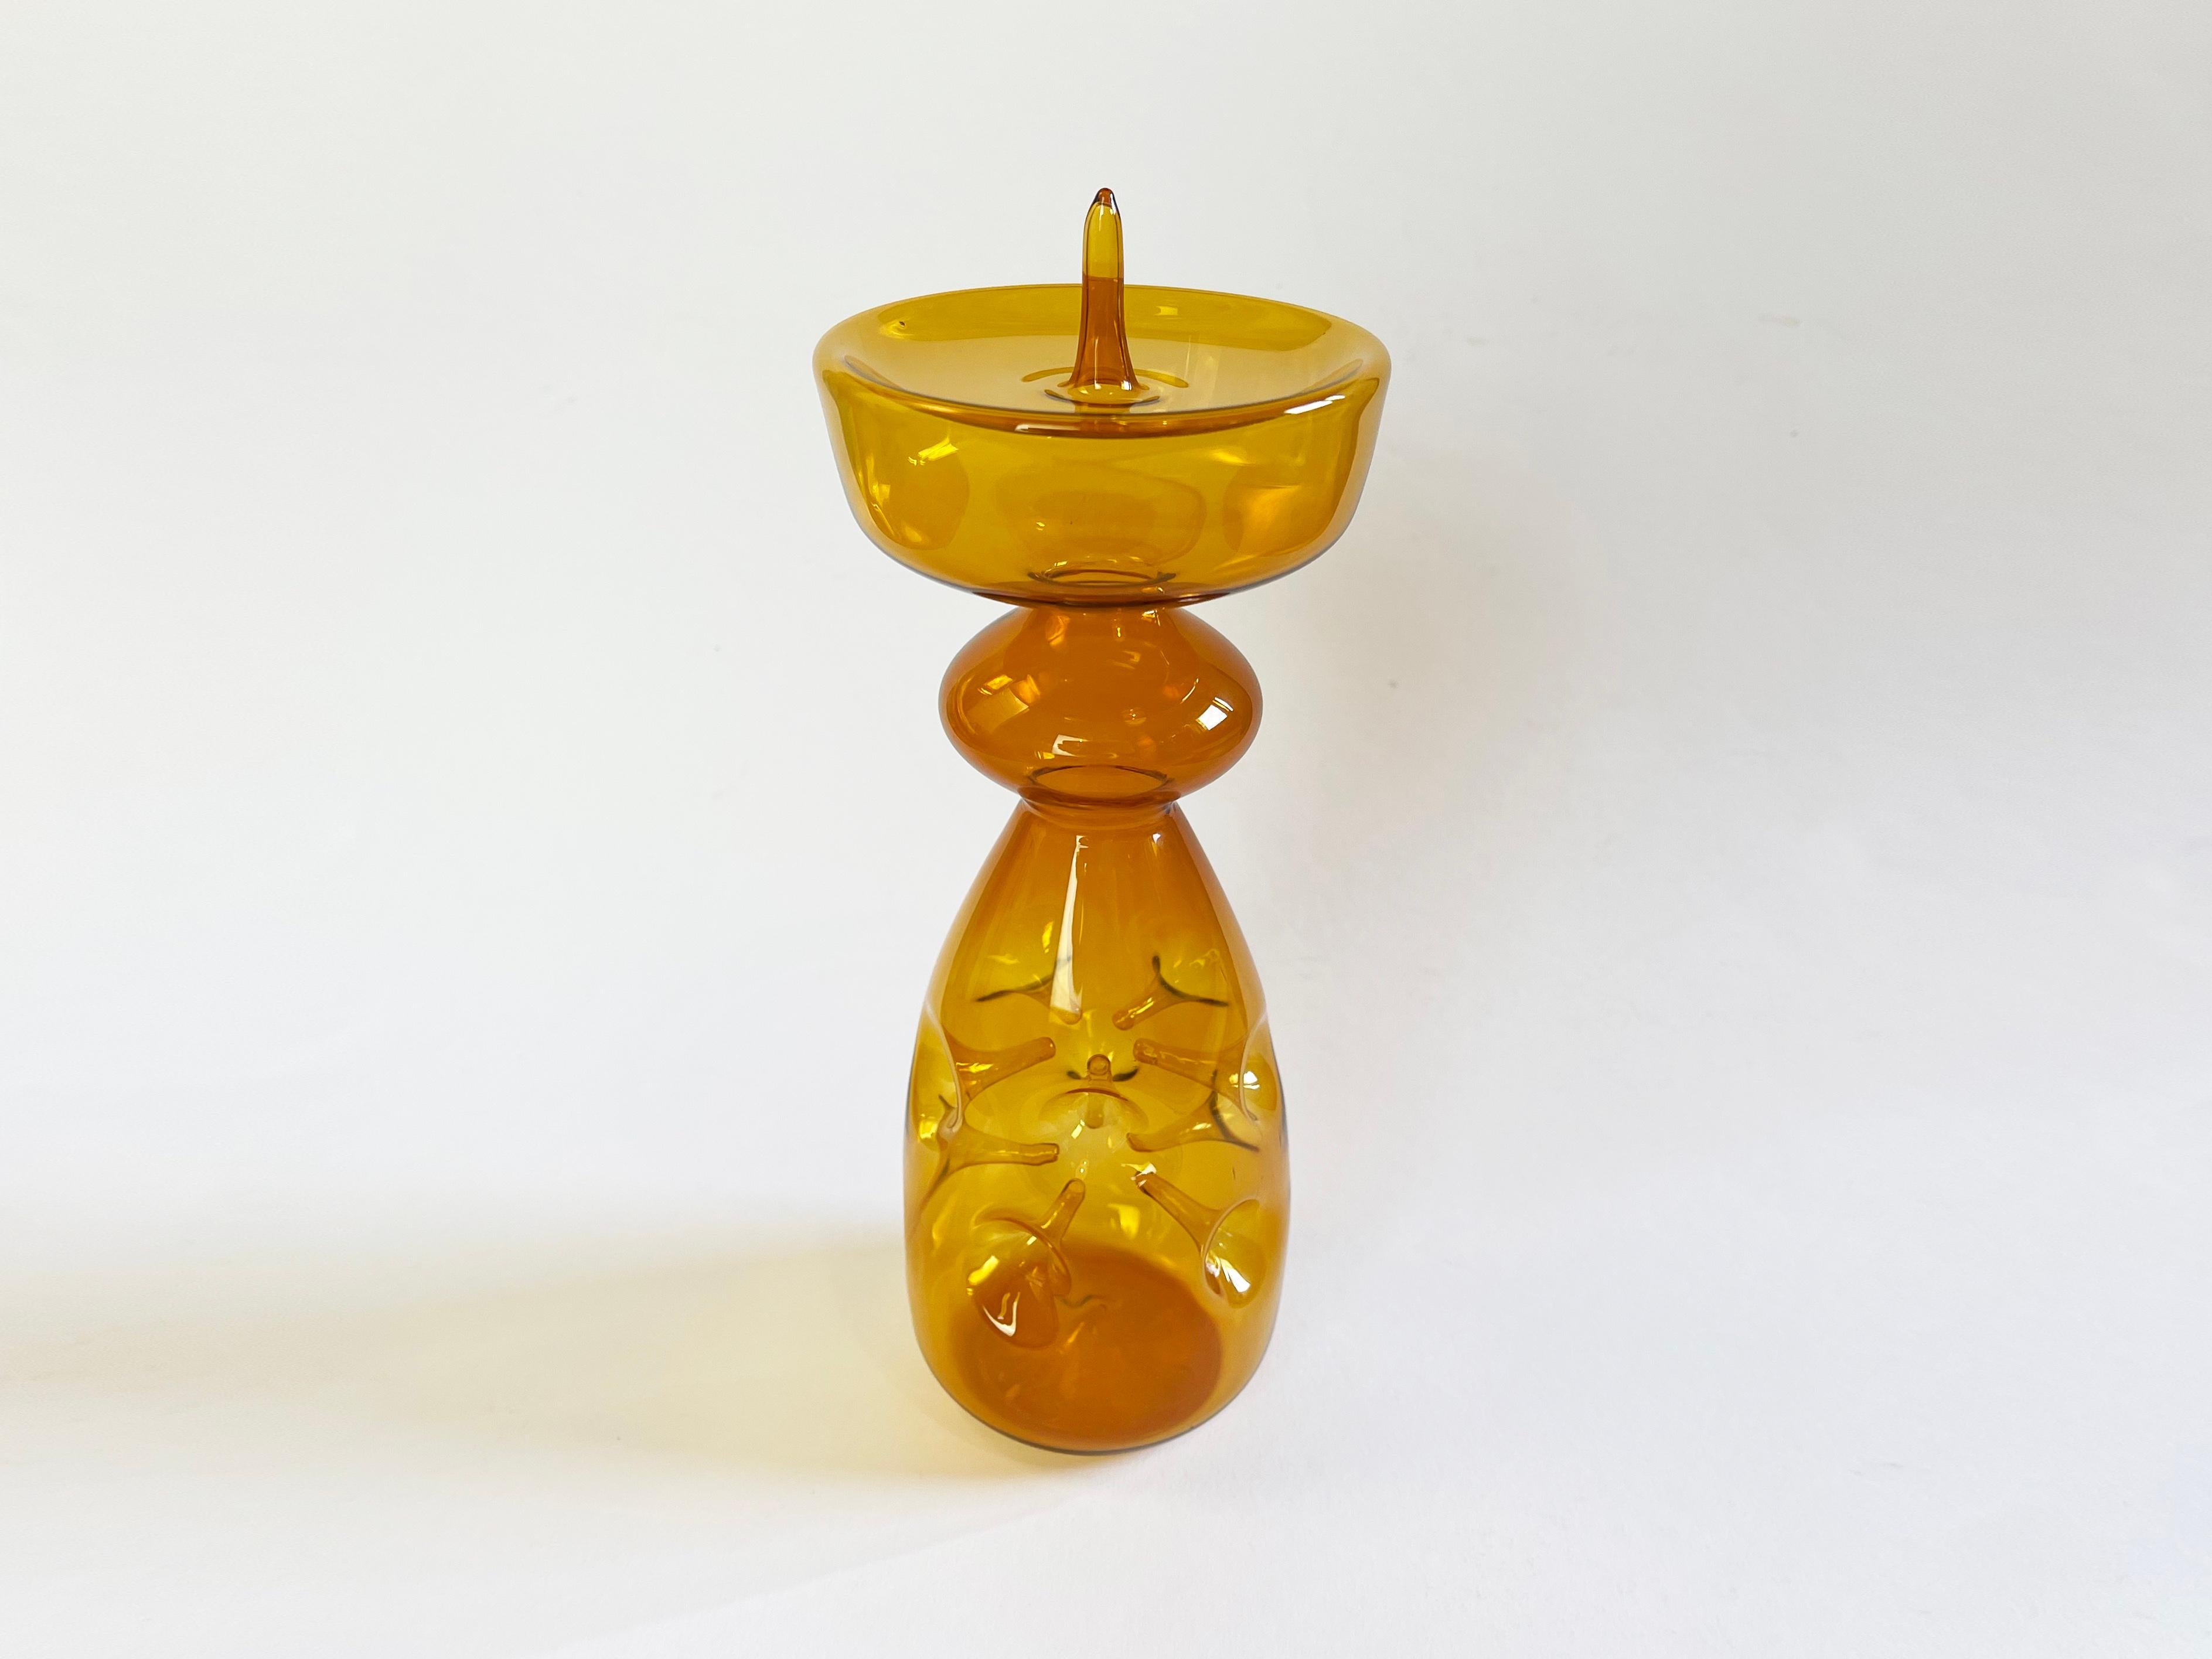 Absolutely fantastic candlestick by Albin Schaedel, GDR, Lauscha - the war left its mark: in the ''Series'' ''Grenades'', Albin 
Schaedel has produced different works of art: here is this fabulous candlestick made of amber-colored, delicate glass,